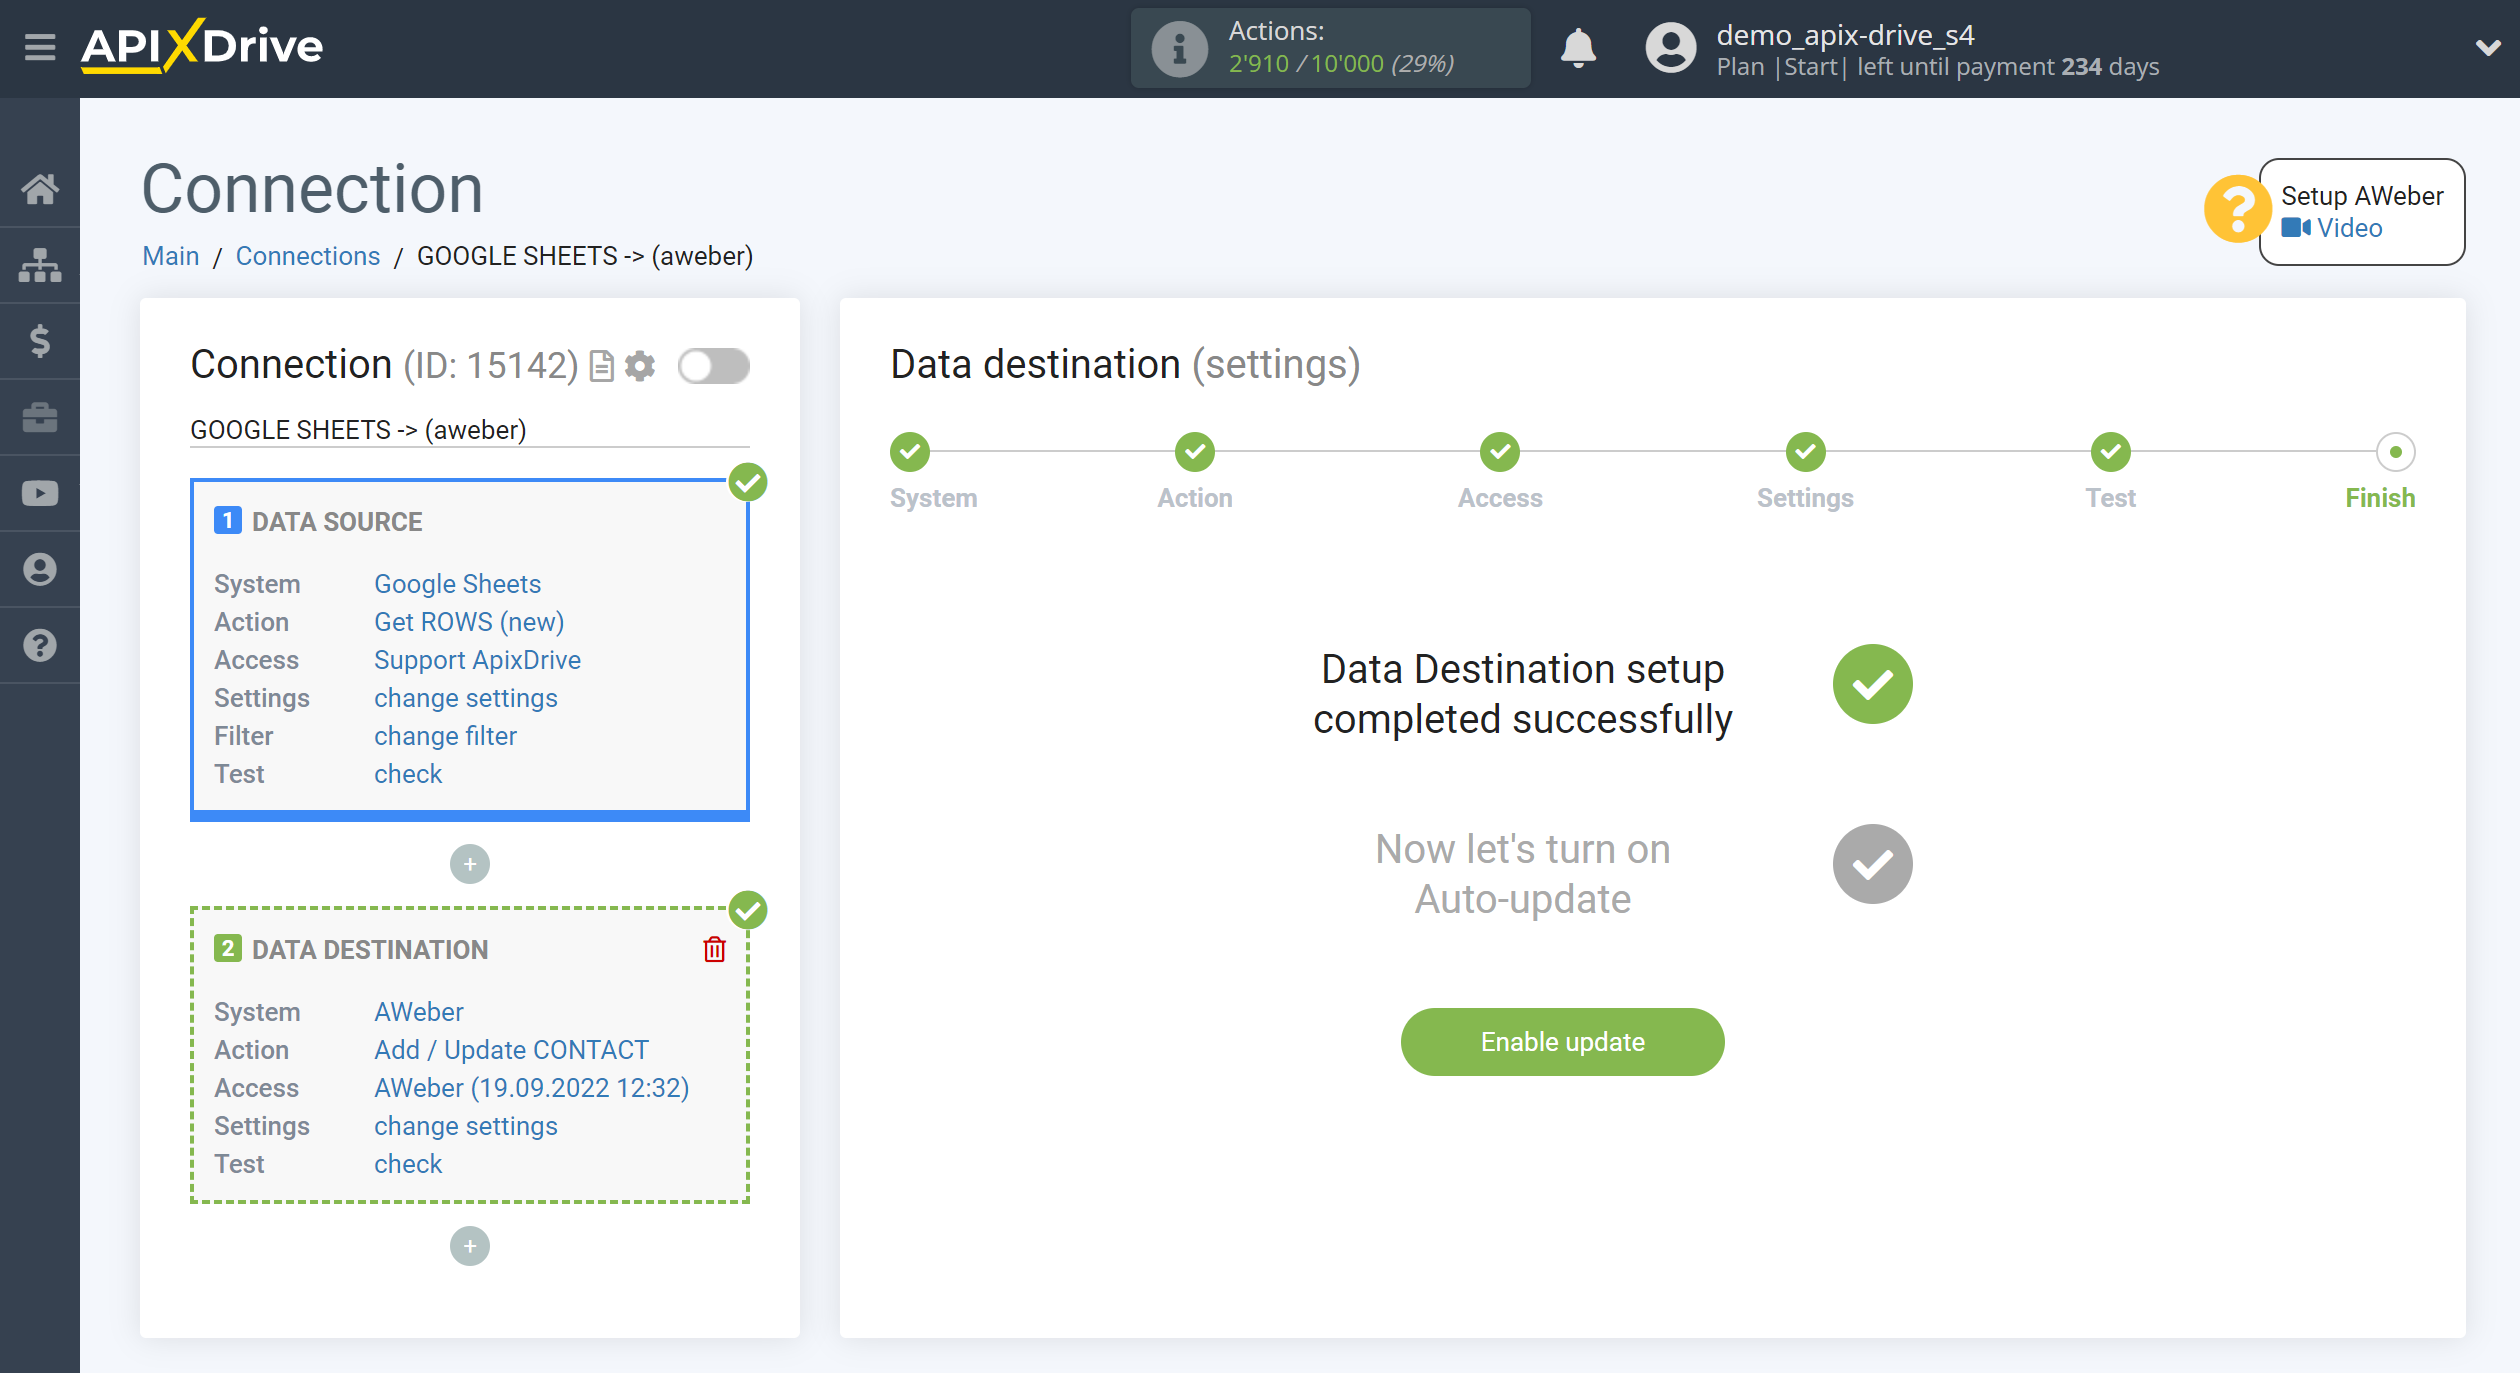 How to Connect Aweber as Data Destination | Enable auto-update